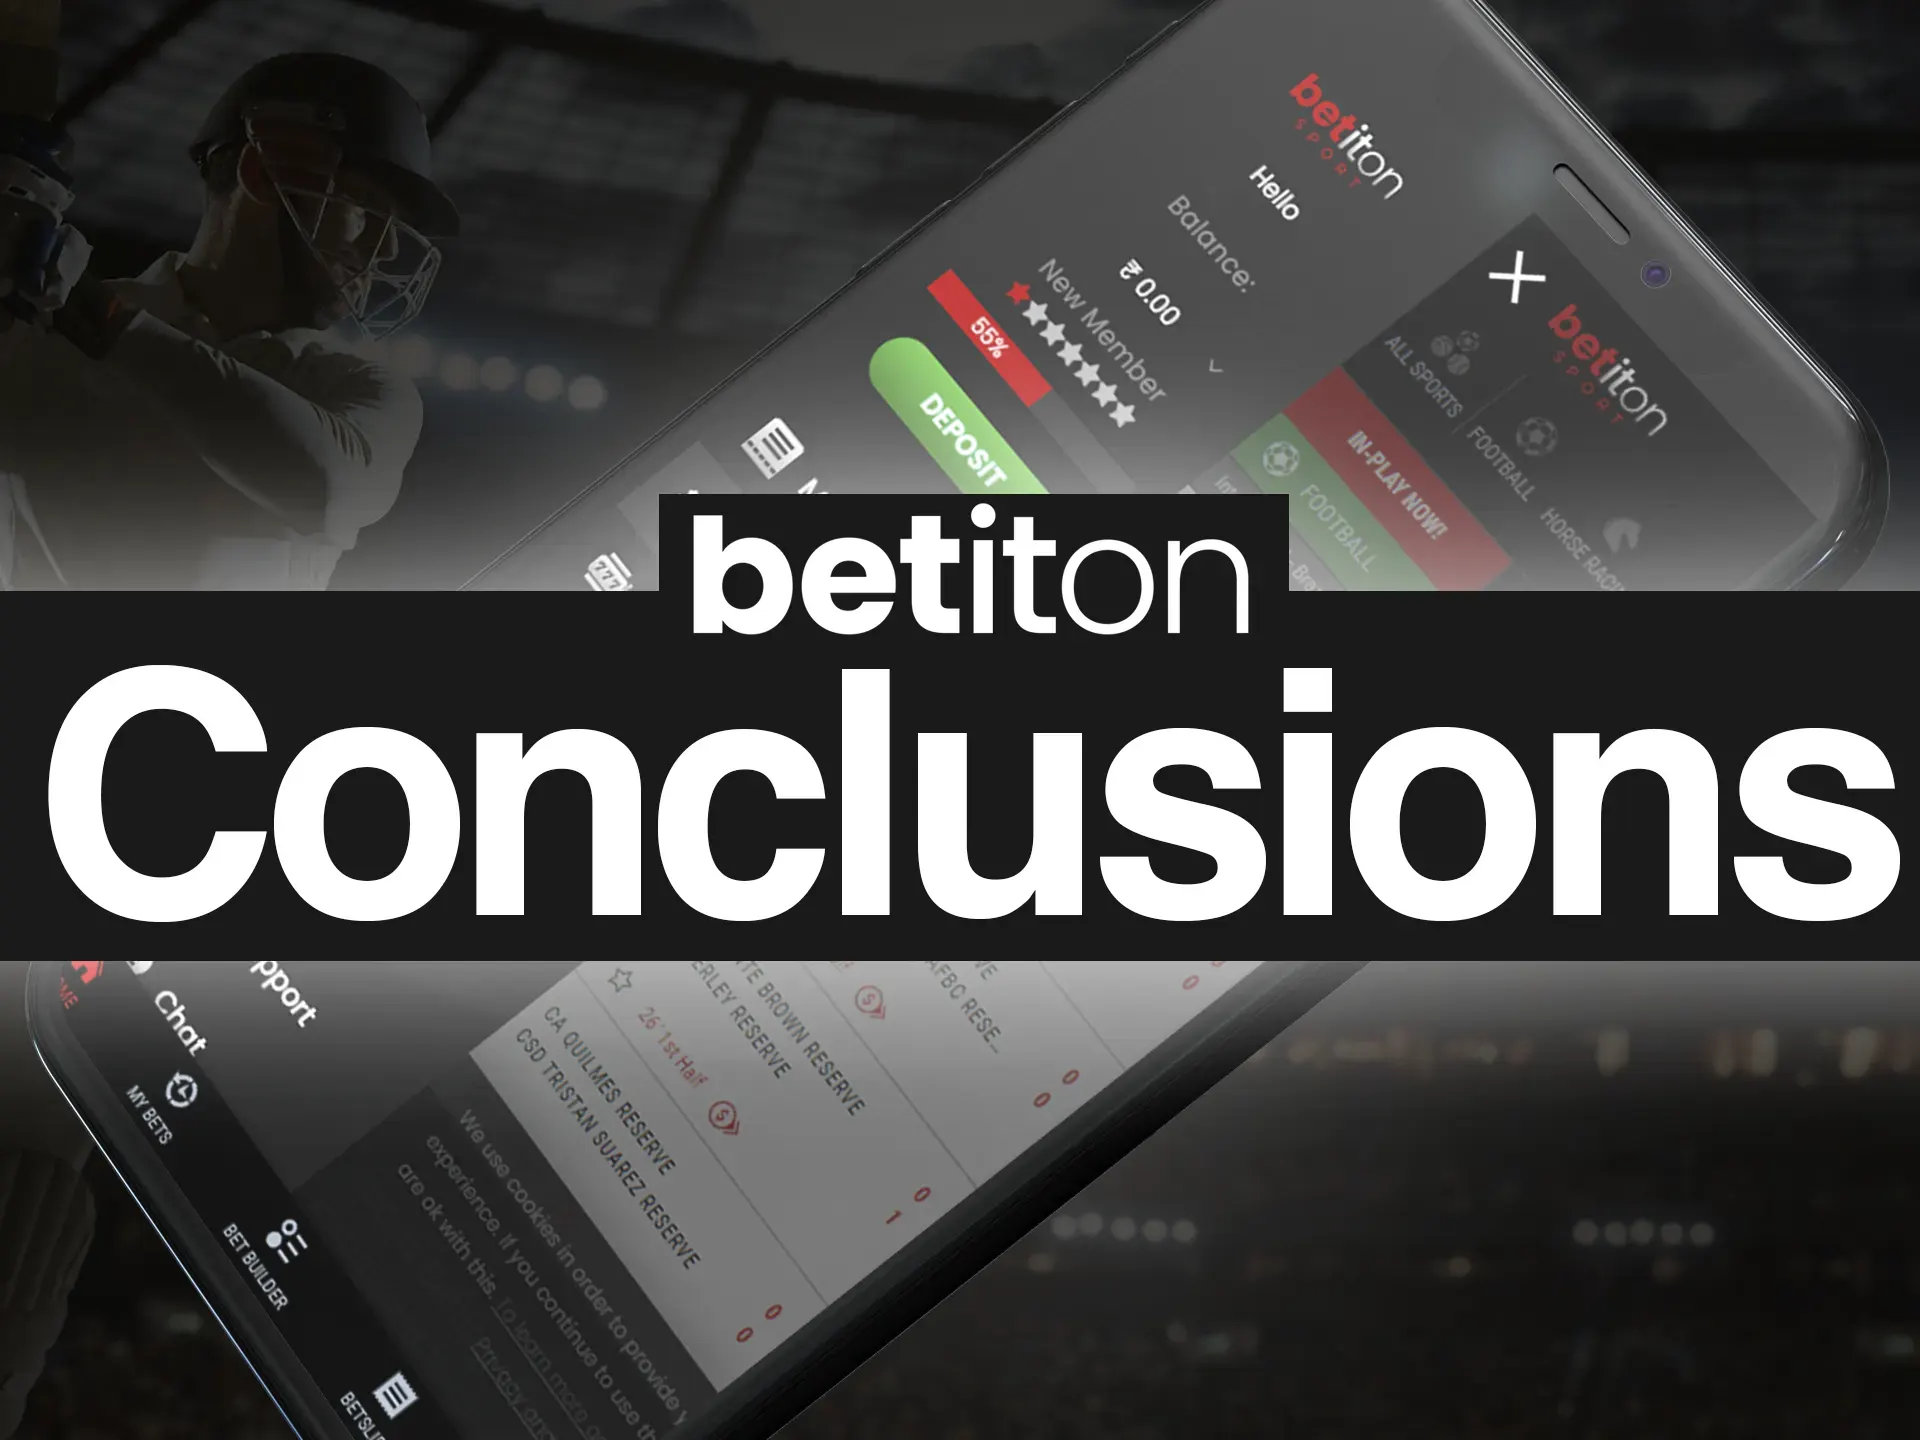 Improve your betting experience with the Betiton app.